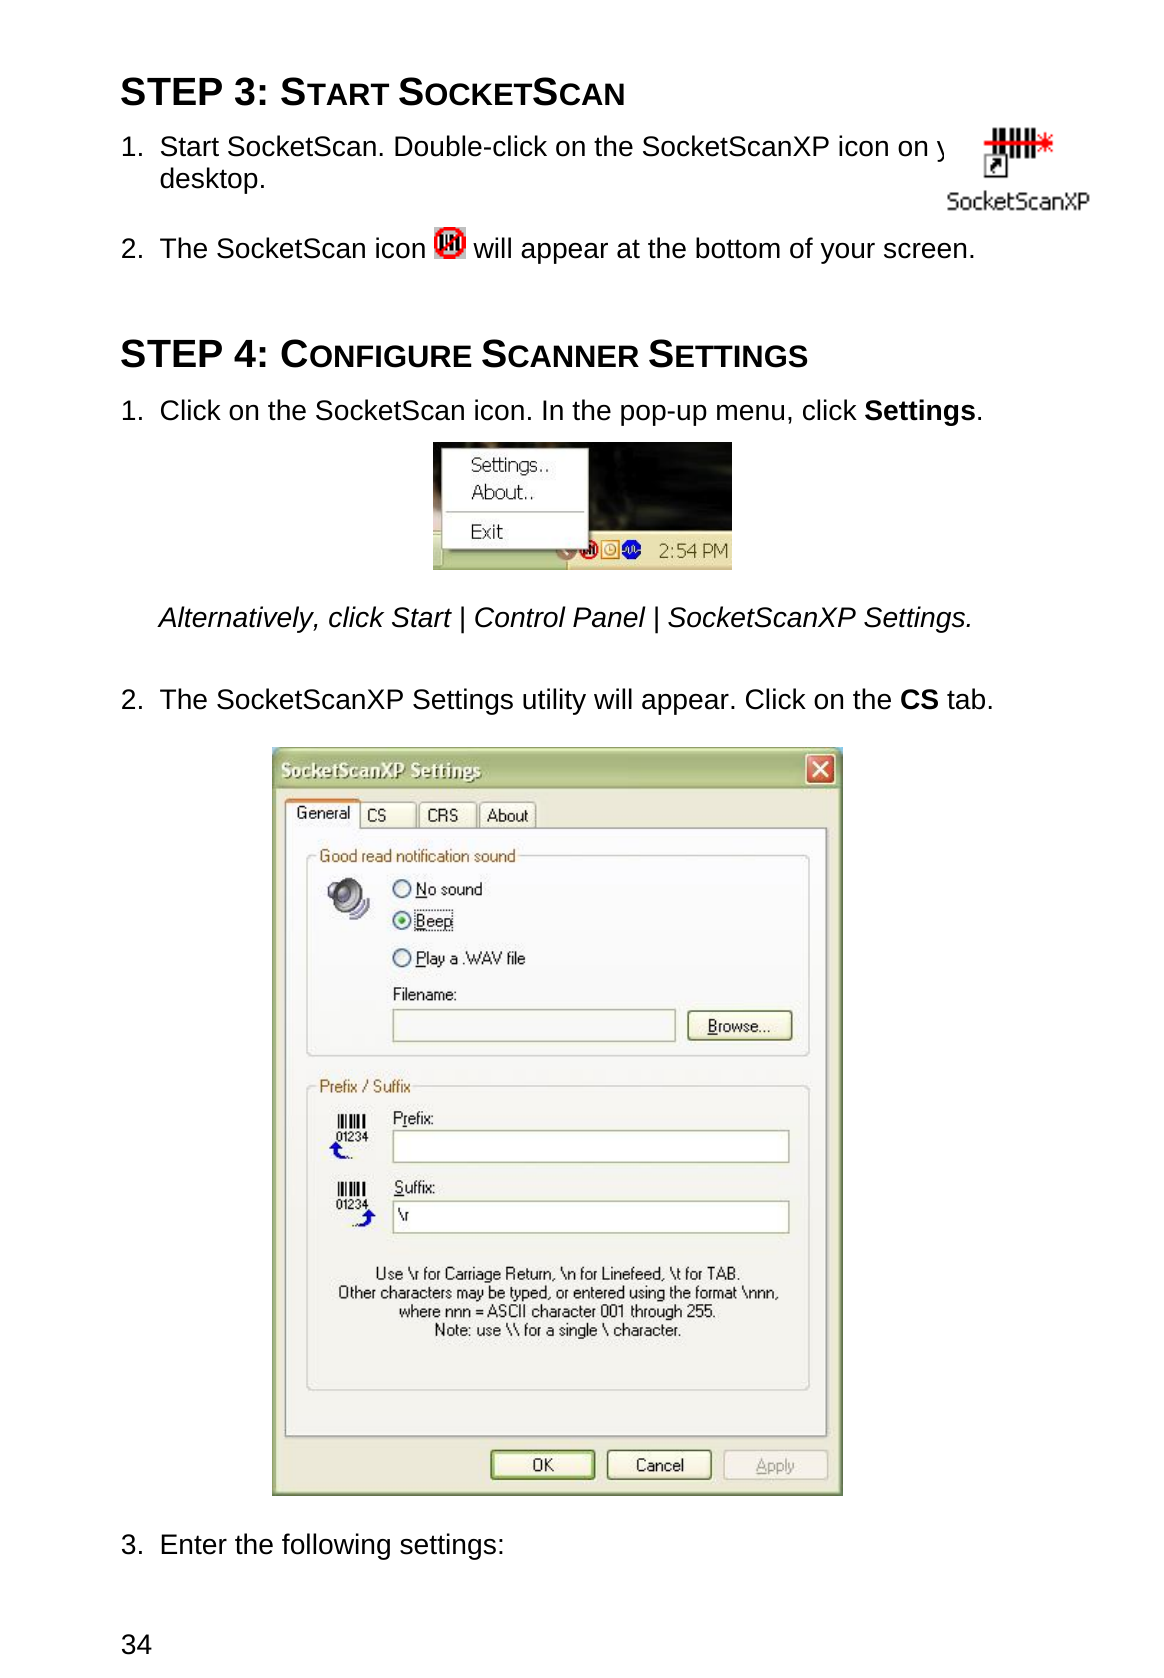 34 STEP 3: START SOCKETSCAN  1. Start SocketScan. Double-click on the SocketScanXP icon on your desktop.  2. The SocketScan icon   will appear at the bottom of your screen.   STEP 4: CONFIGURE SCANNER SETTINGS  1.  Click on the SocketScan icon. In the pop-up menu, click Settings.    Alternatively, click Start | Control Panel | SocketScanXP Settings.  2. The SocketScanXP Settings utility will appear. Click on the CS tab.    3.  Enter the following settings: 